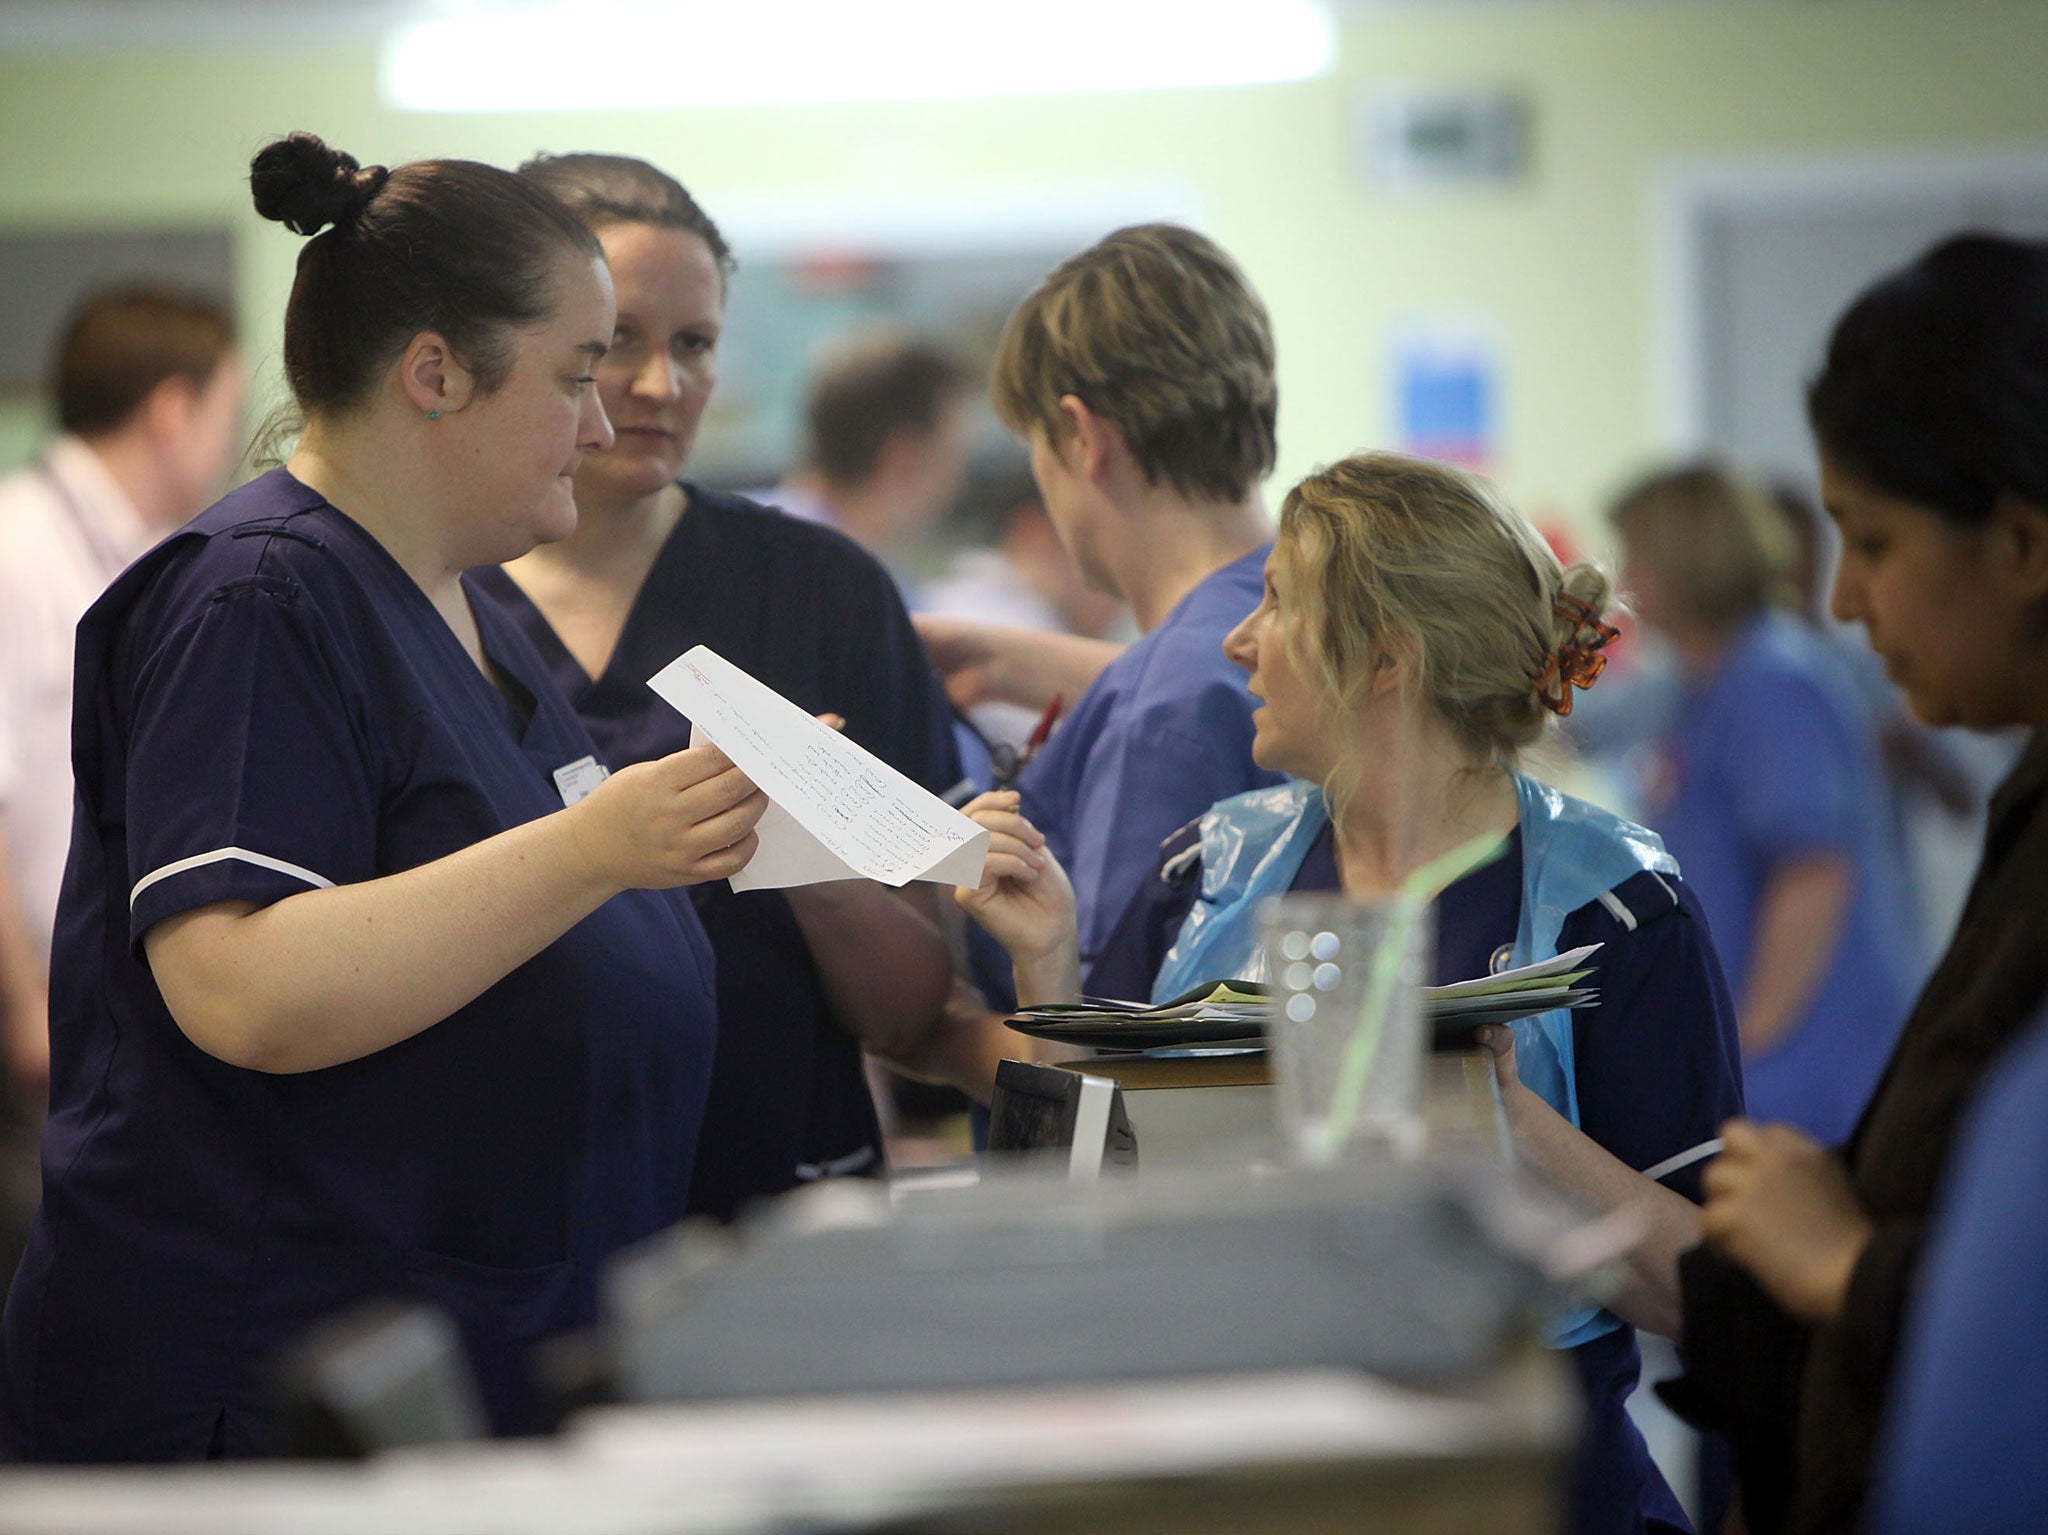 Nurses in the accident and emergency dept of Selly Oak Hospital work during a busy shift on March 16, 2010 in Birmingham, England.